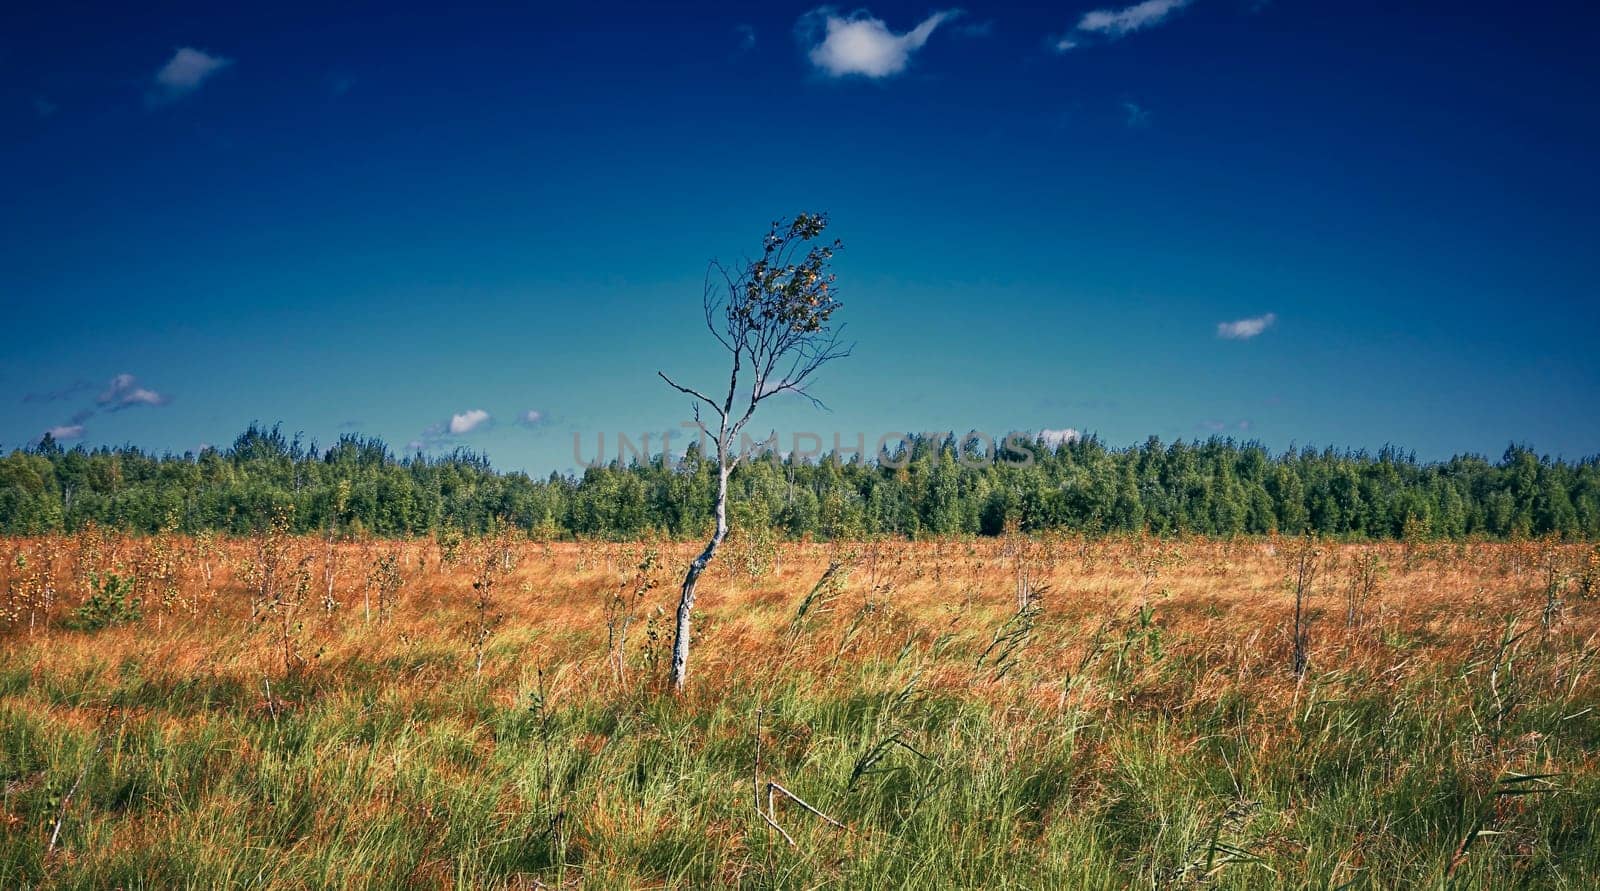 Solitary tree in vast grass field on sunny day with blue sky and clouds in background. by Hil